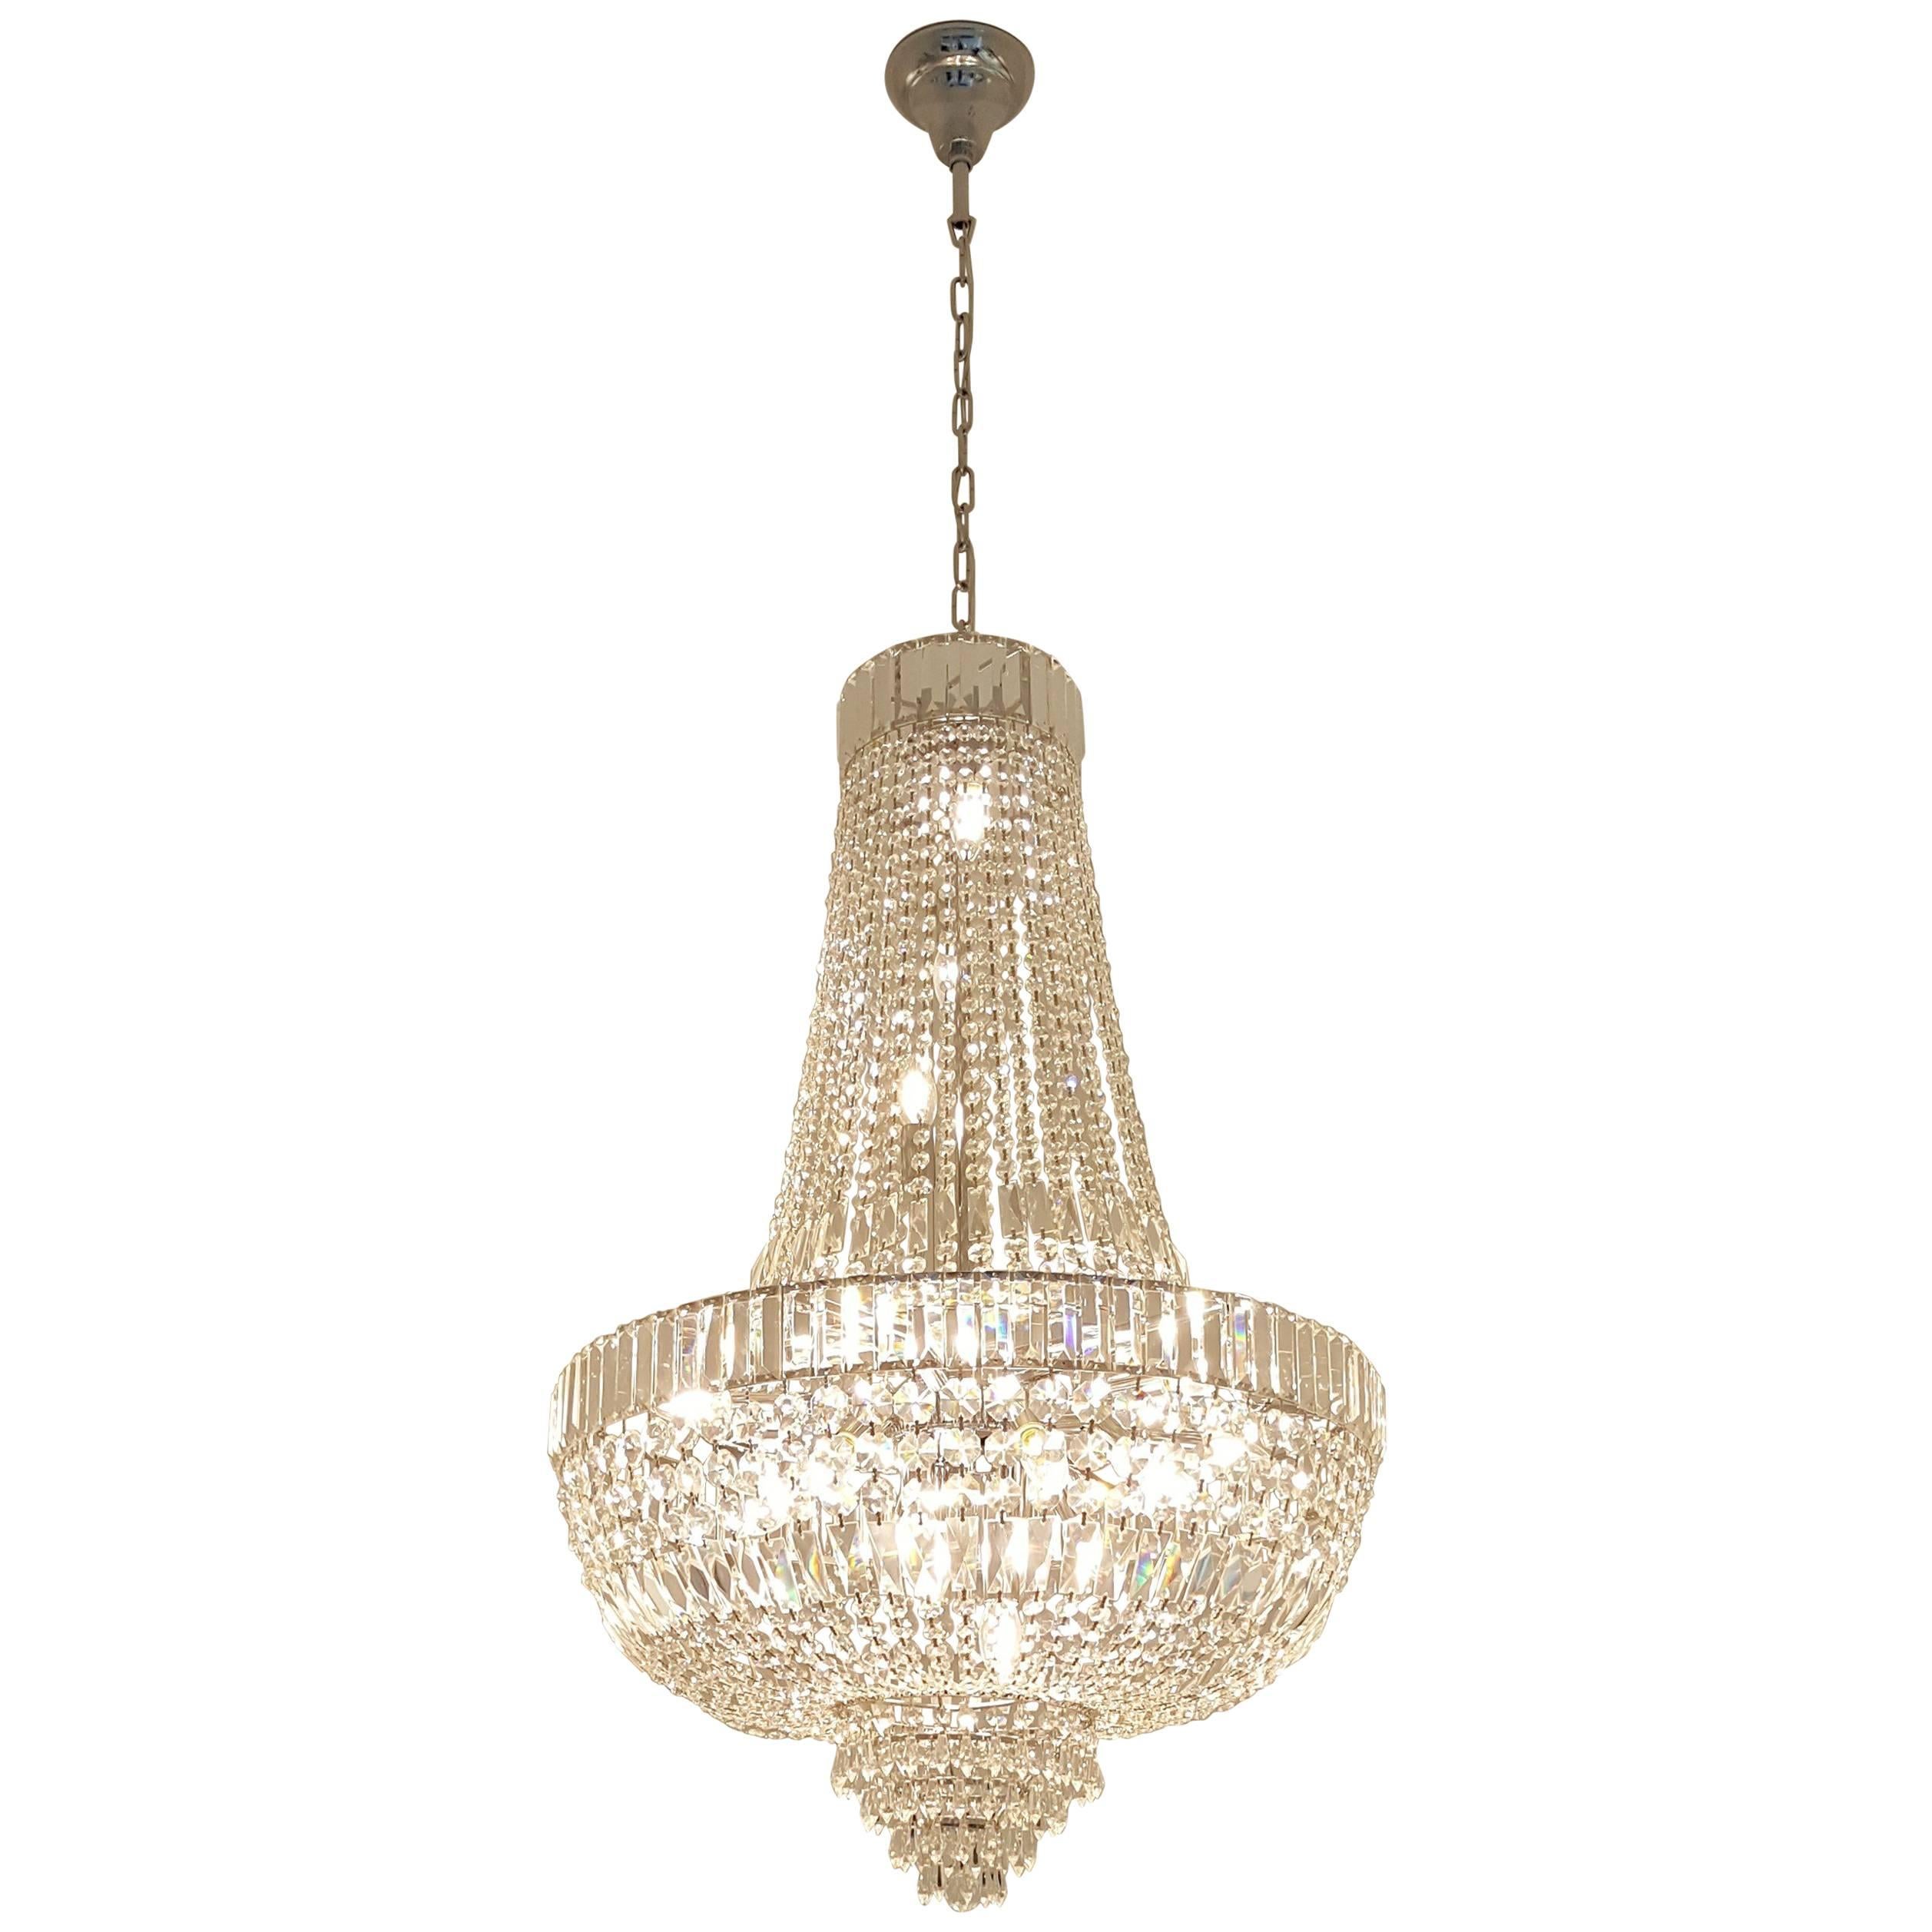 Art Deco Style Crystal Chandelier Empire Sac a Pearl Palace Lamp Chrome